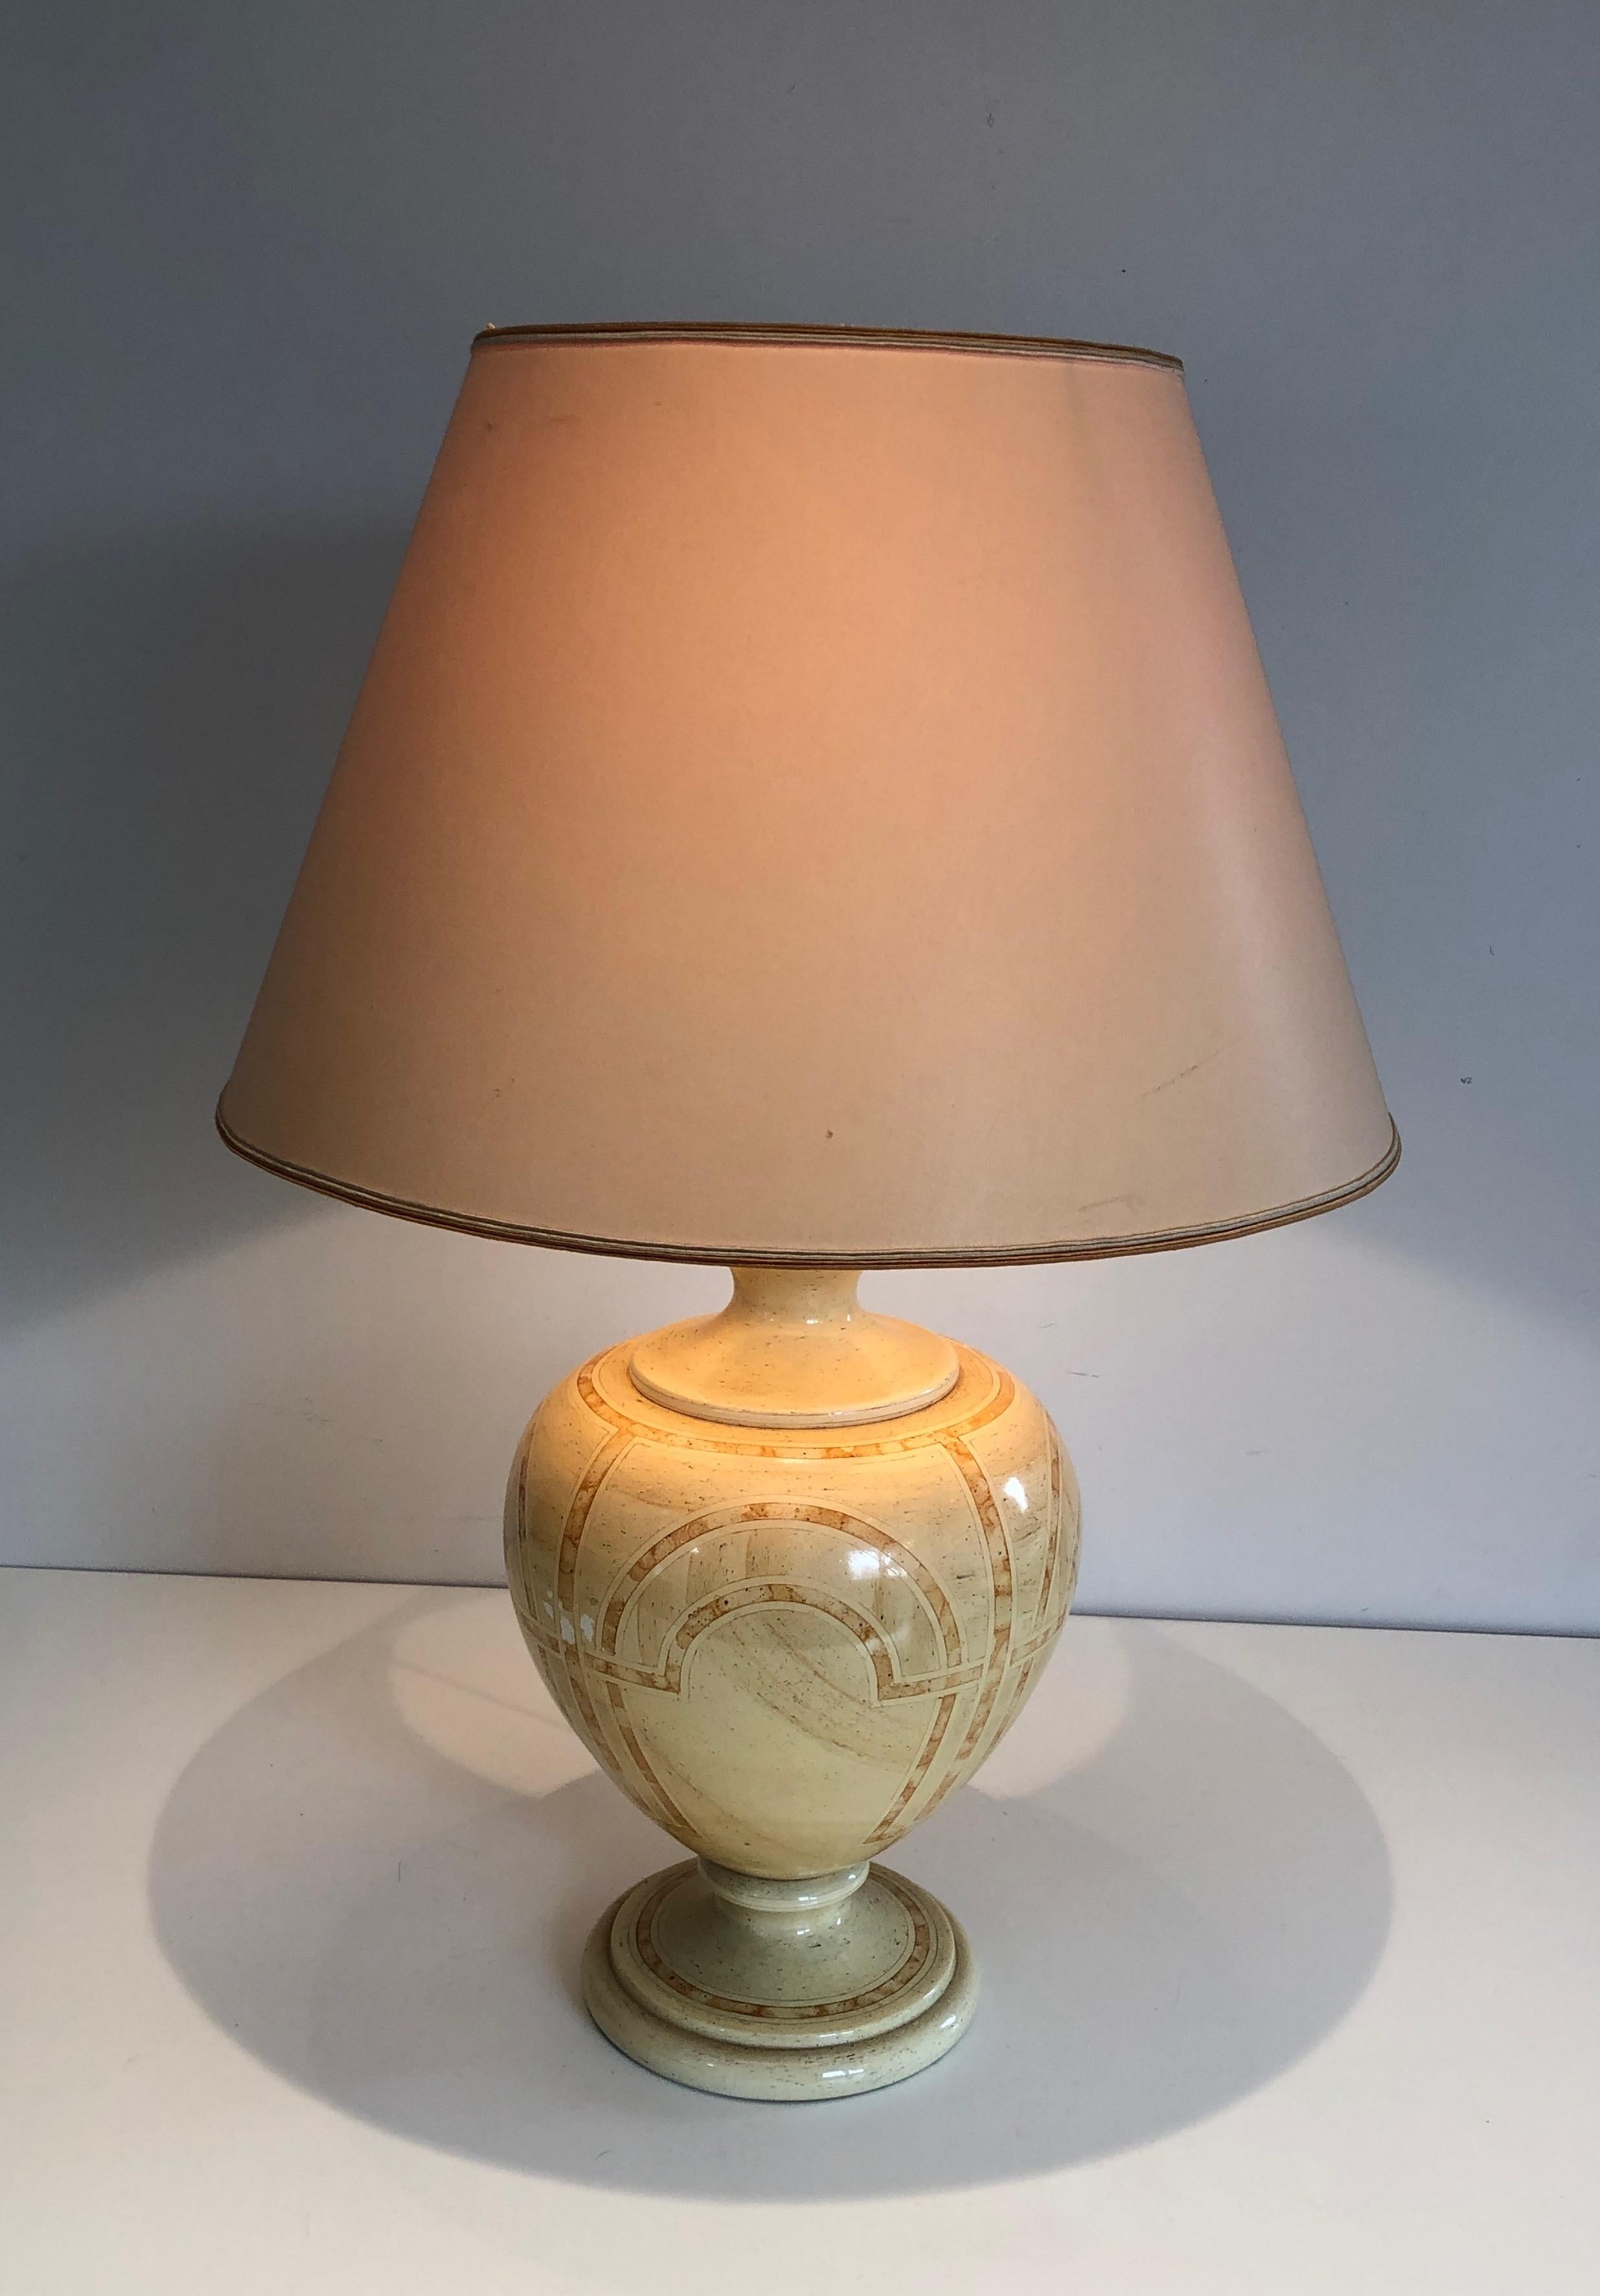 Eggshell Lacquered Table Lamp with Interlacing Decors, French Work, circa 1970 For Sale 5